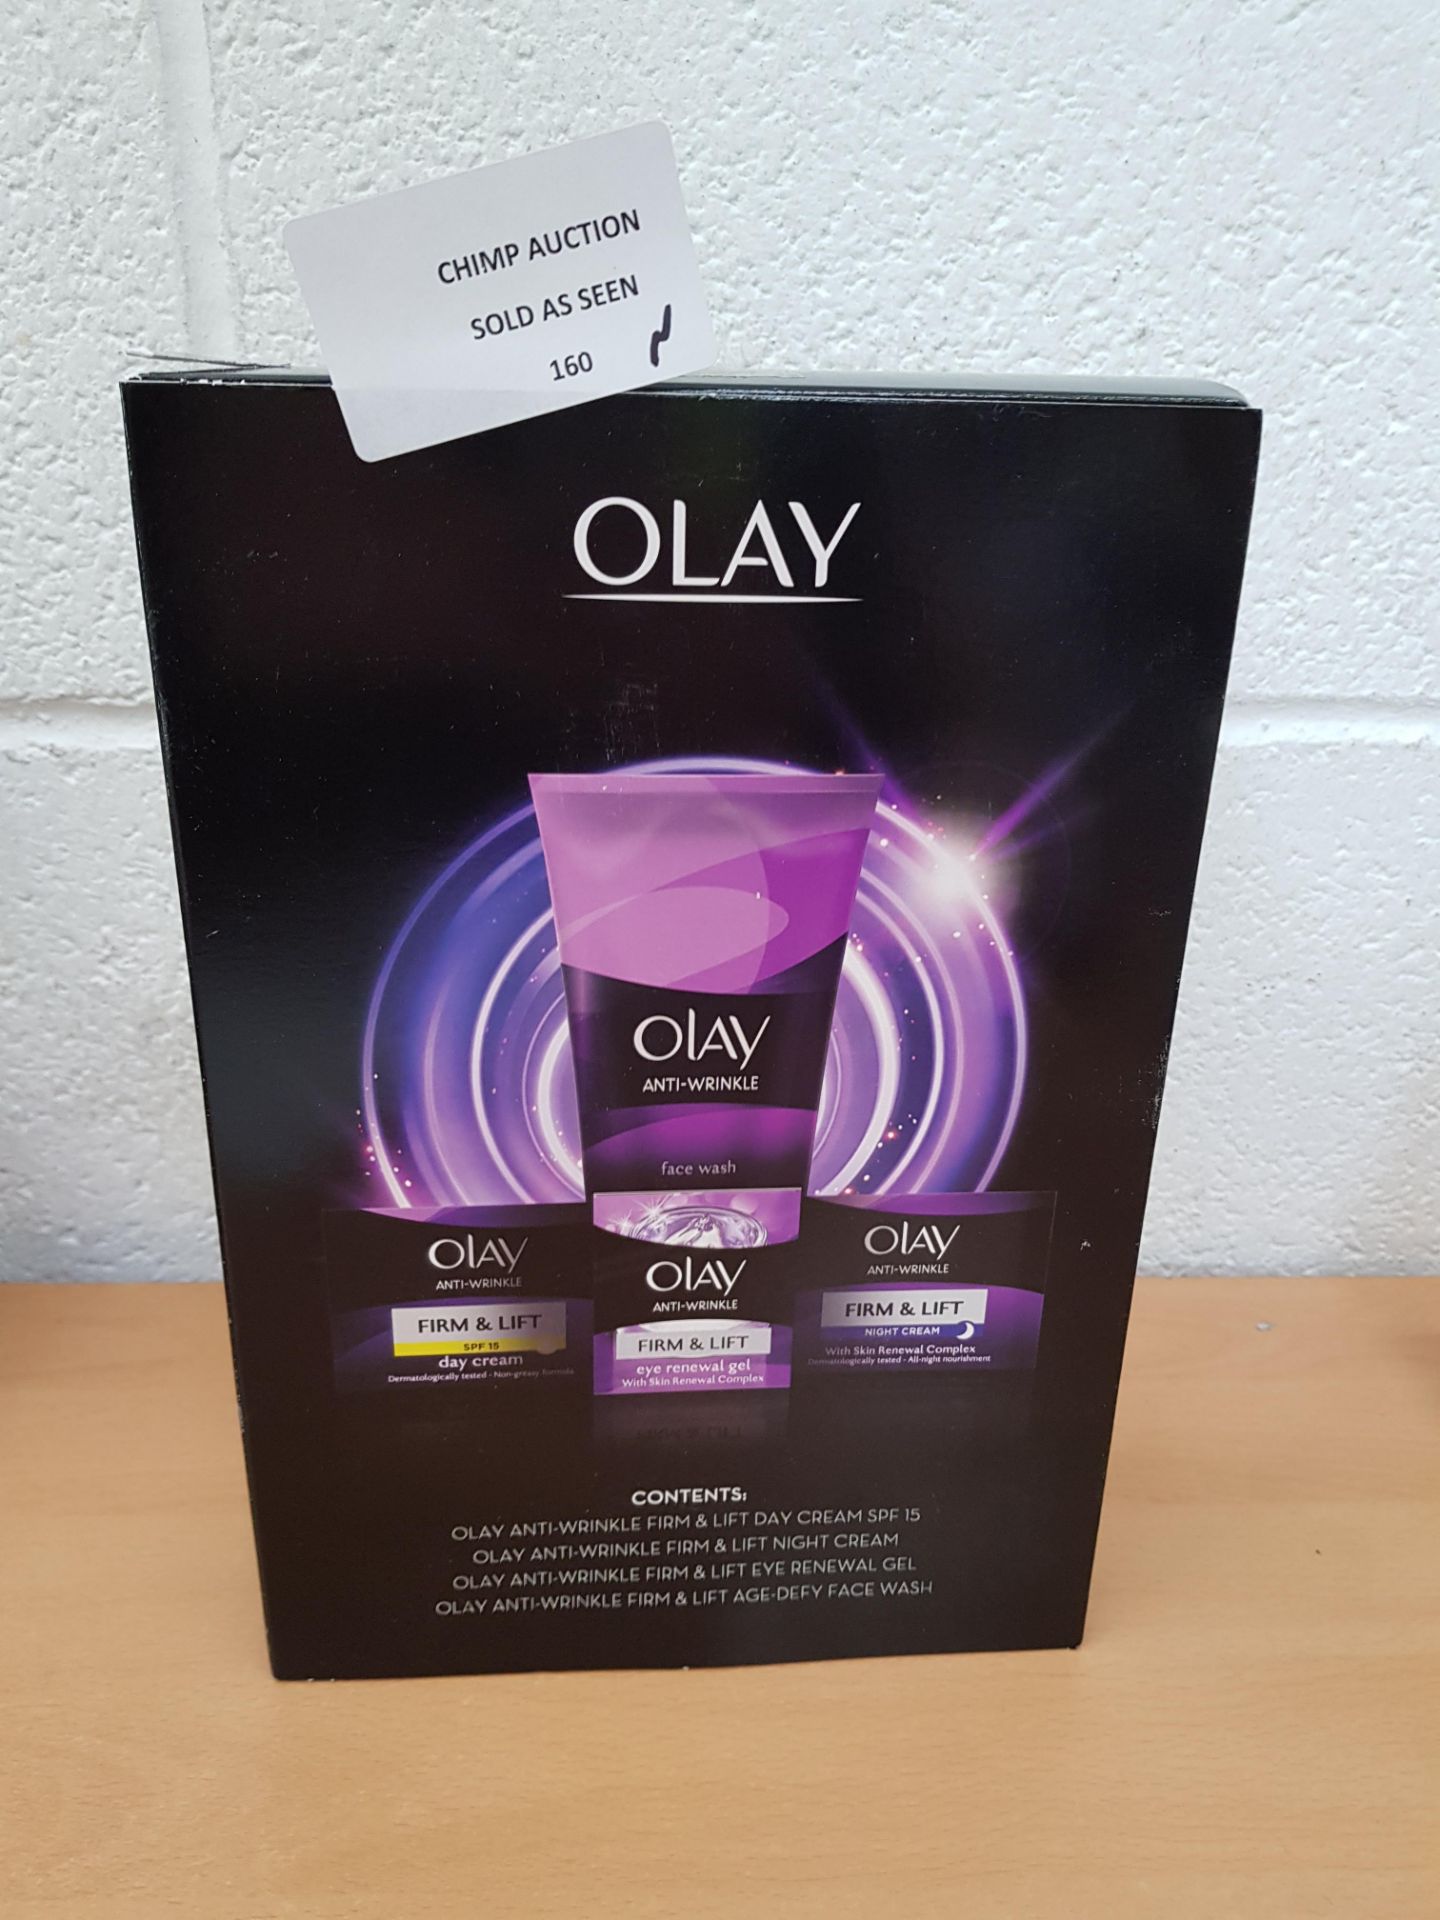 Brand new Olay Anti-Wrinkle Firm & Lift Giftset, Day Cream SPF15 RRP £29.99.